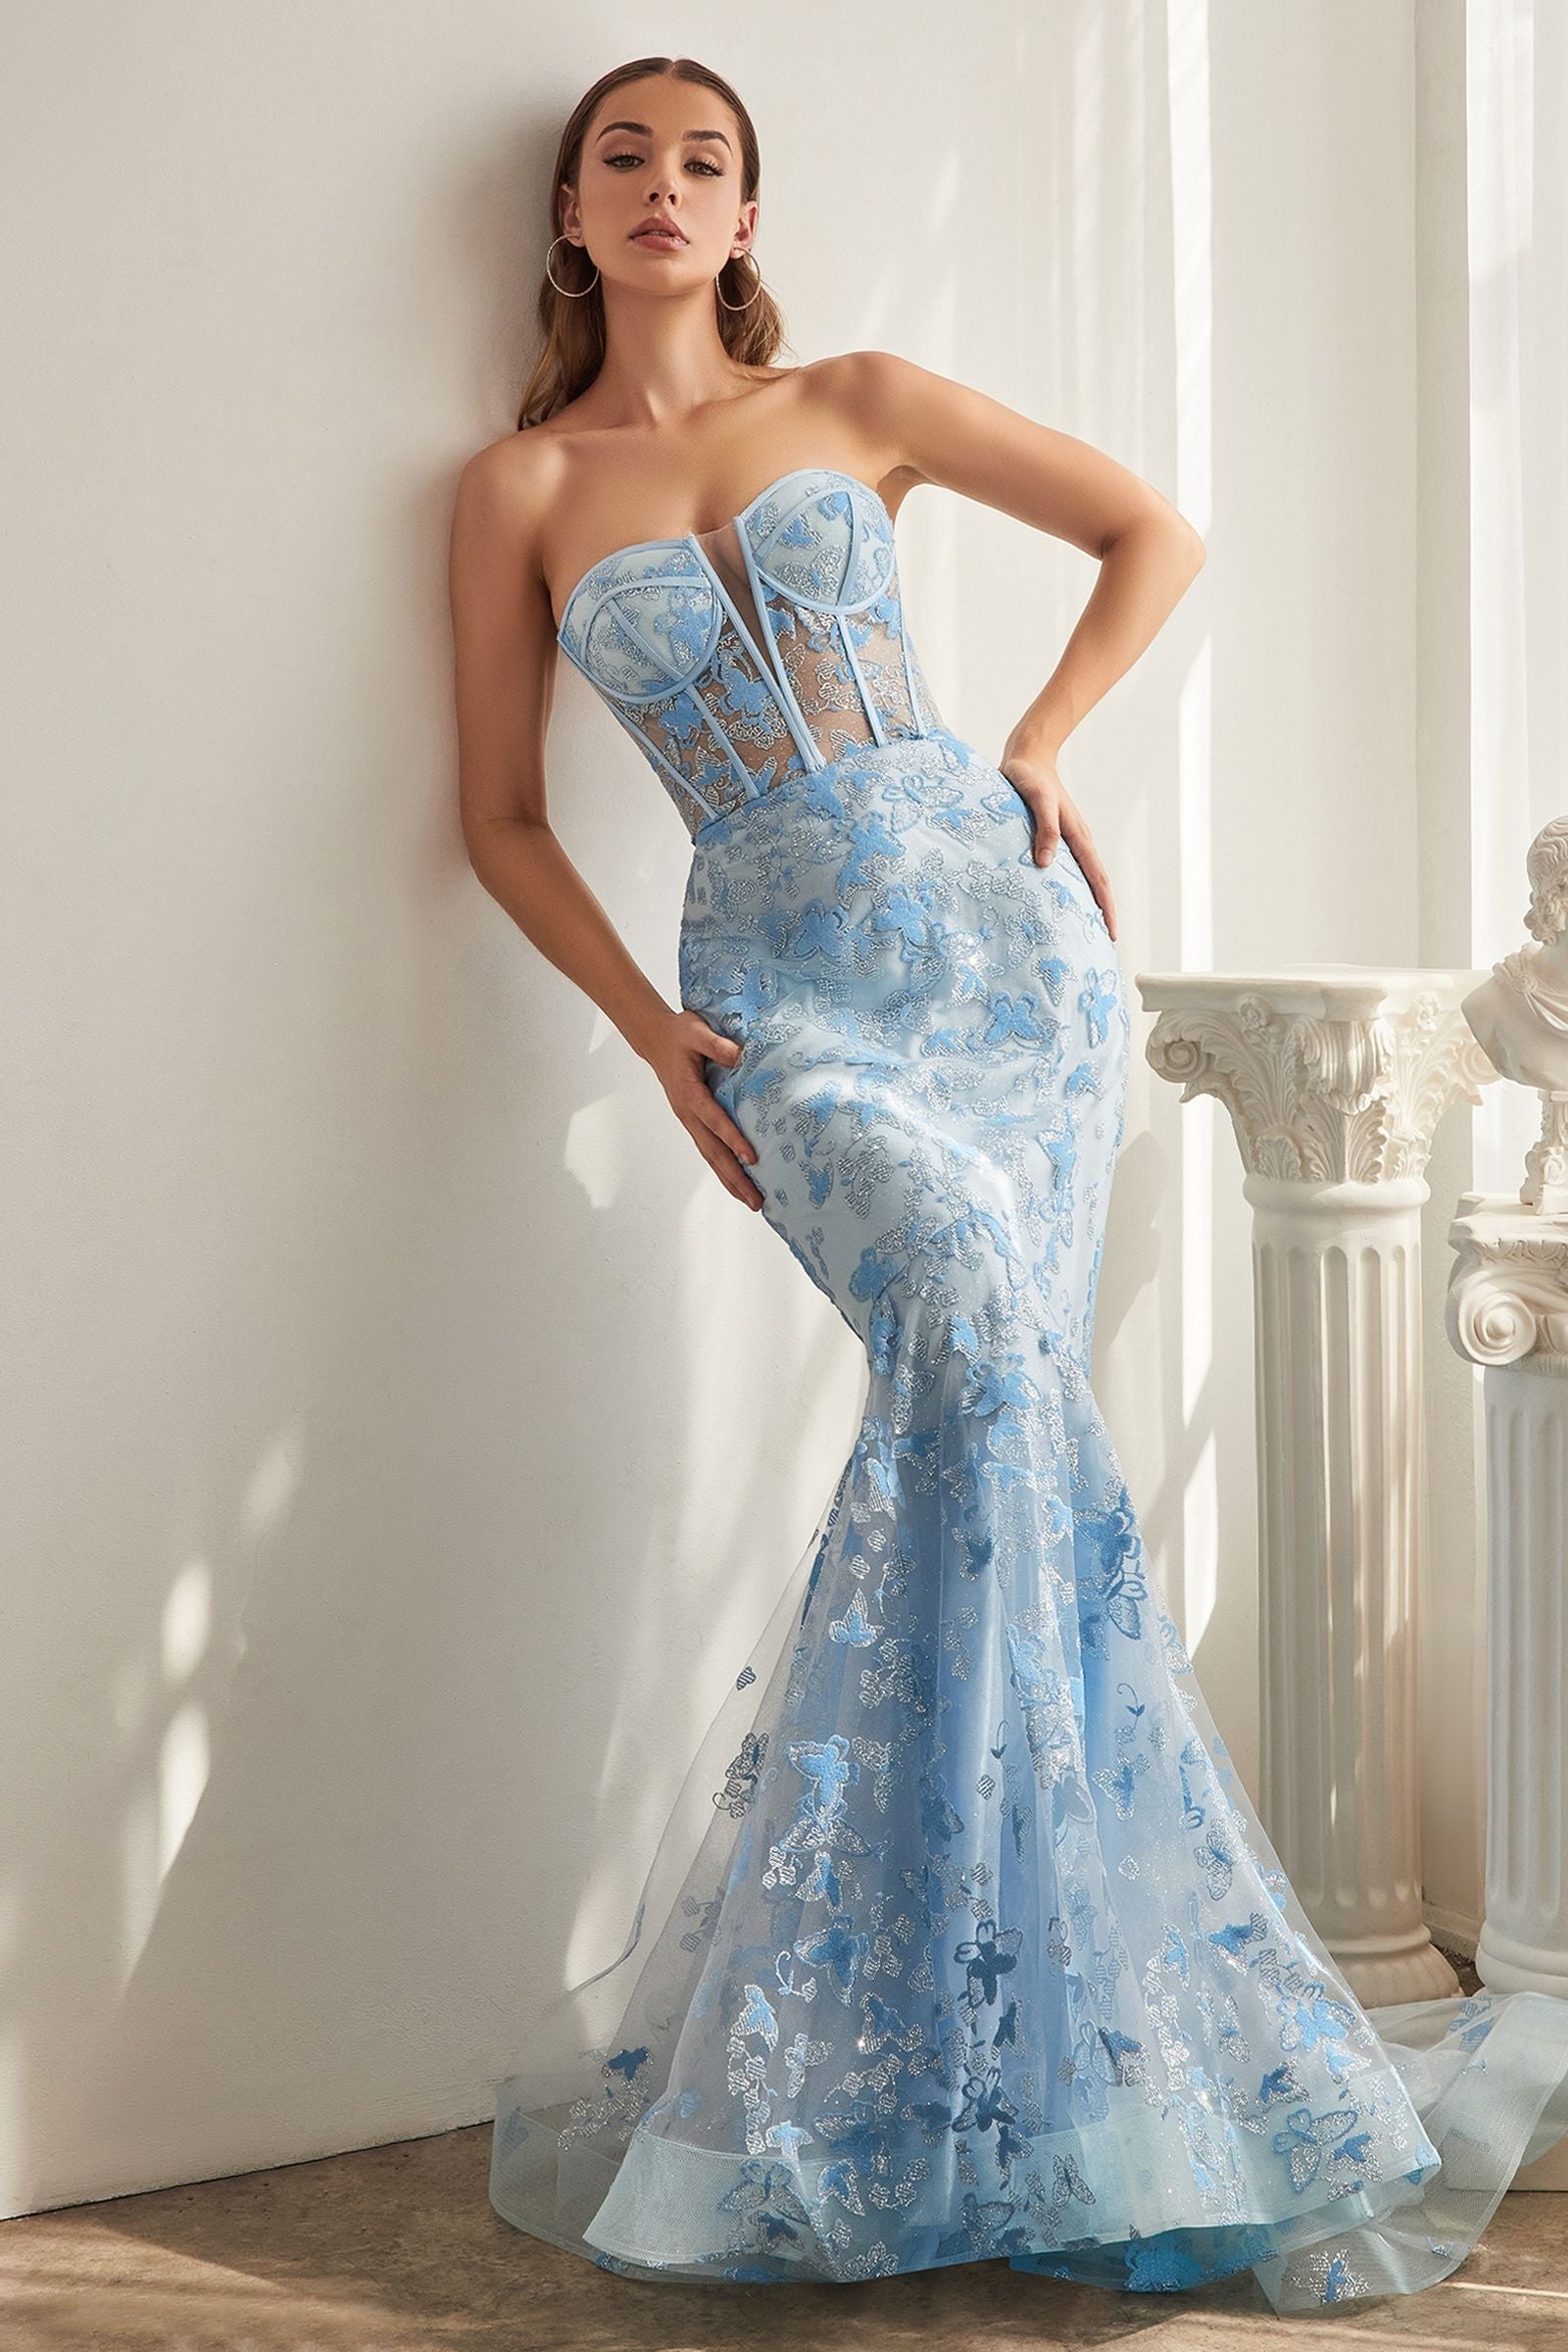 A sophisticated and alluring strapless mermaid gown with an eye-catching butterfly pattern.